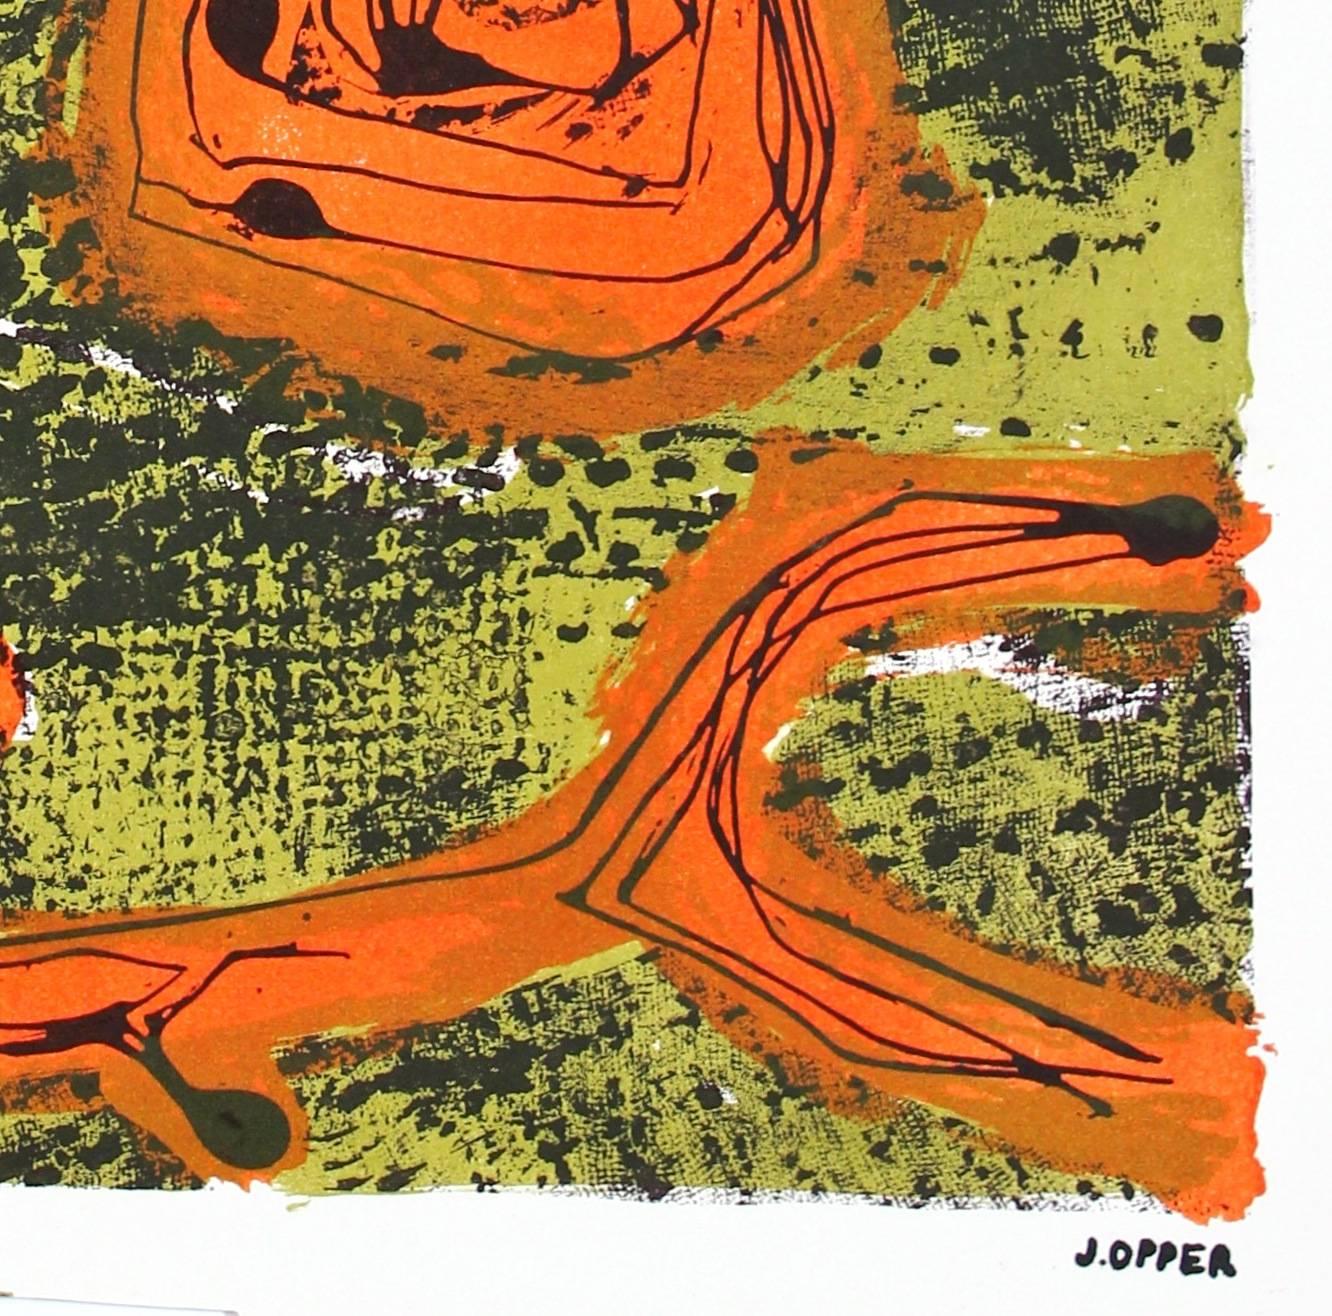 Modernist Abstract Lithograph in Orange and Green, Circa 1950s - Print by Jerry Opper